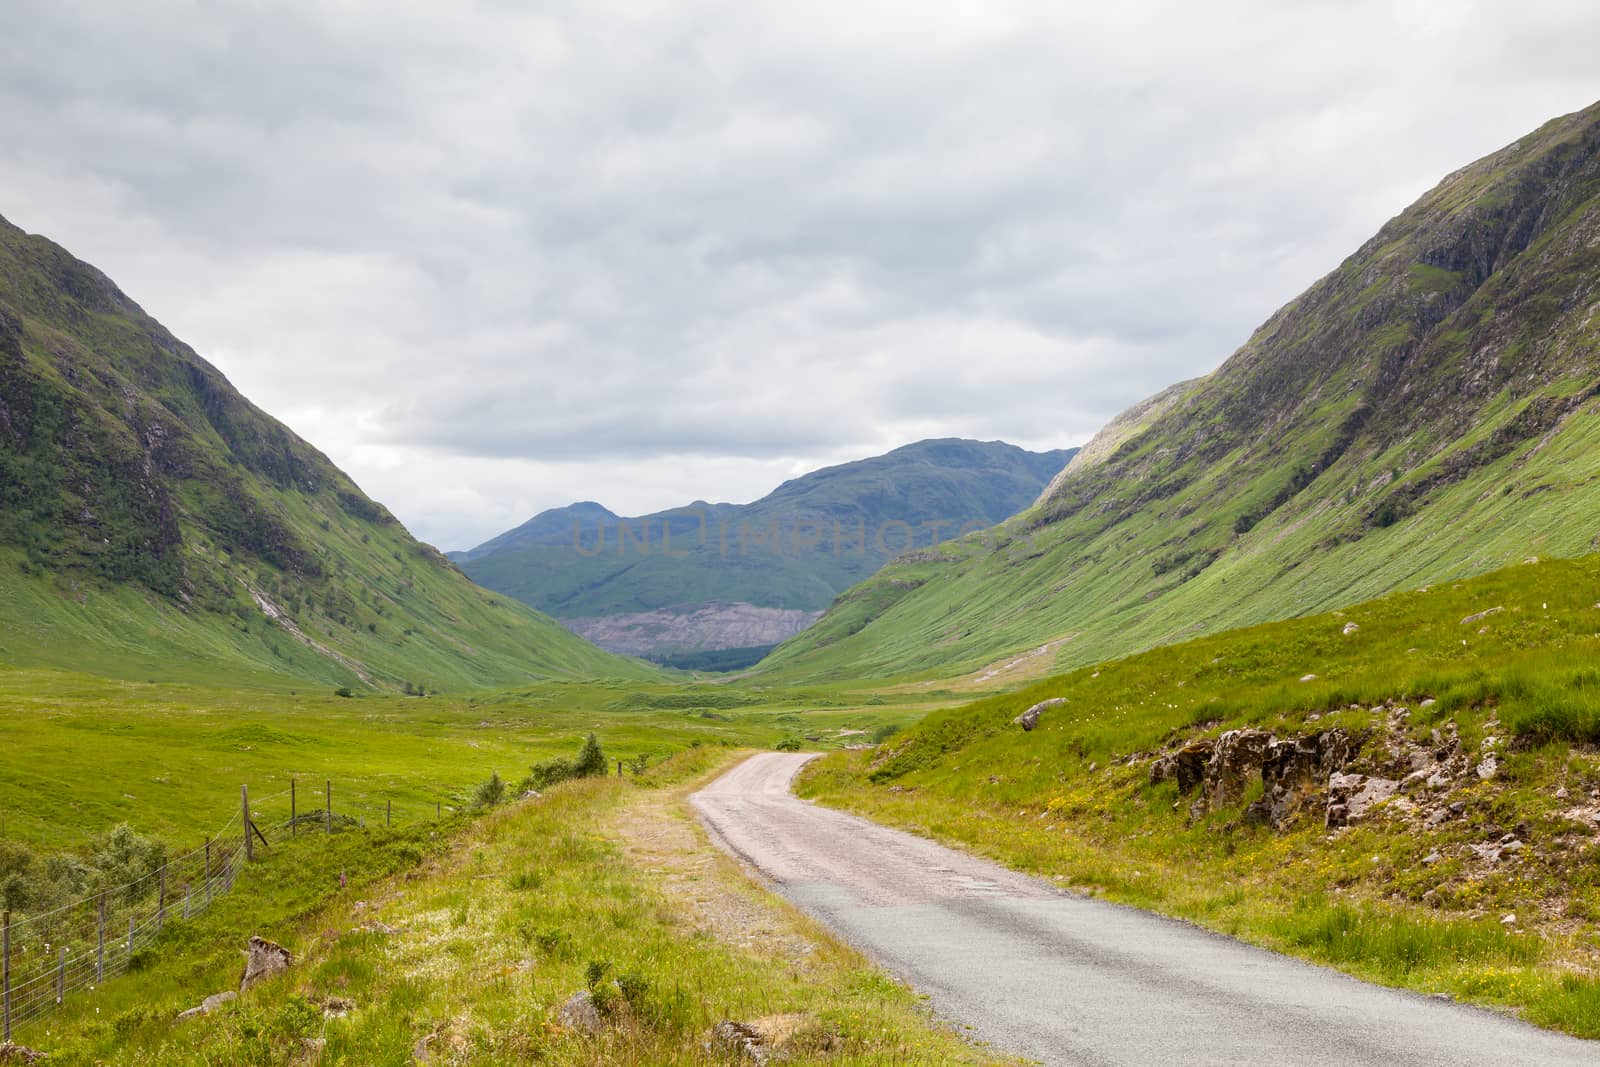 The view looking down Glen Etive in the Scottish highlands.